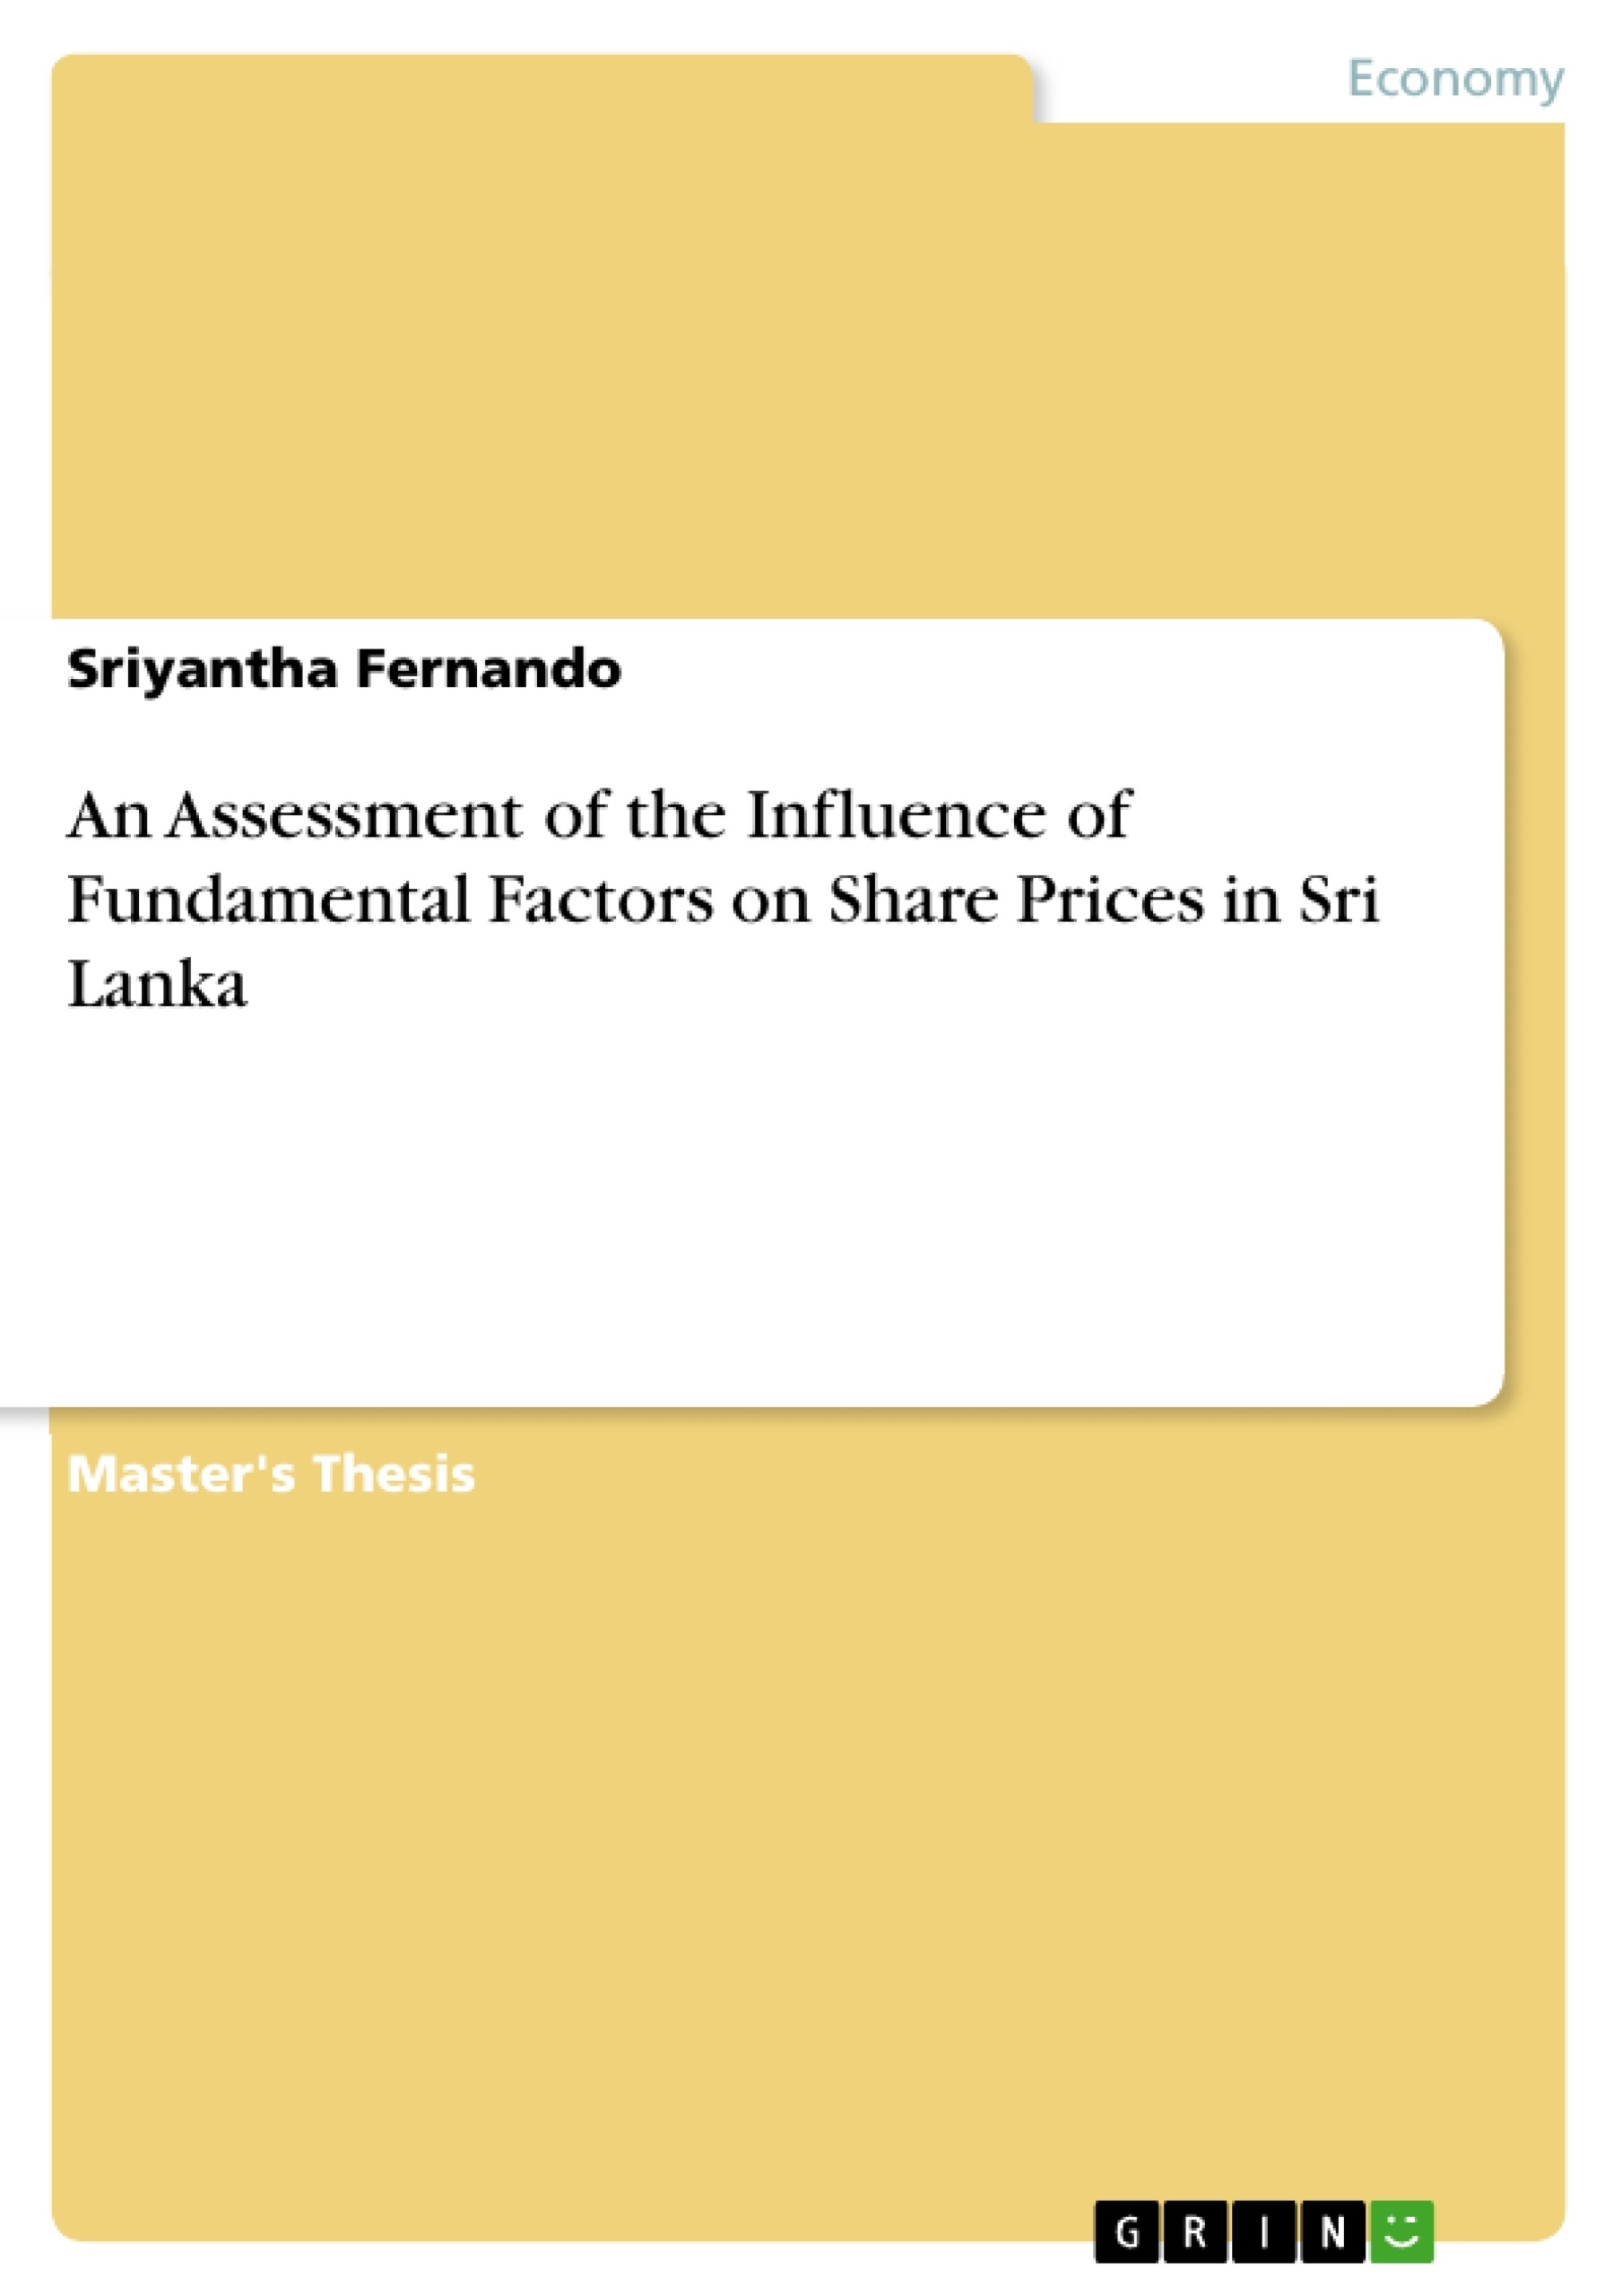 Title: An Assessment of the Influence of Fundamental Factors on Share Prices in Sri Lanka